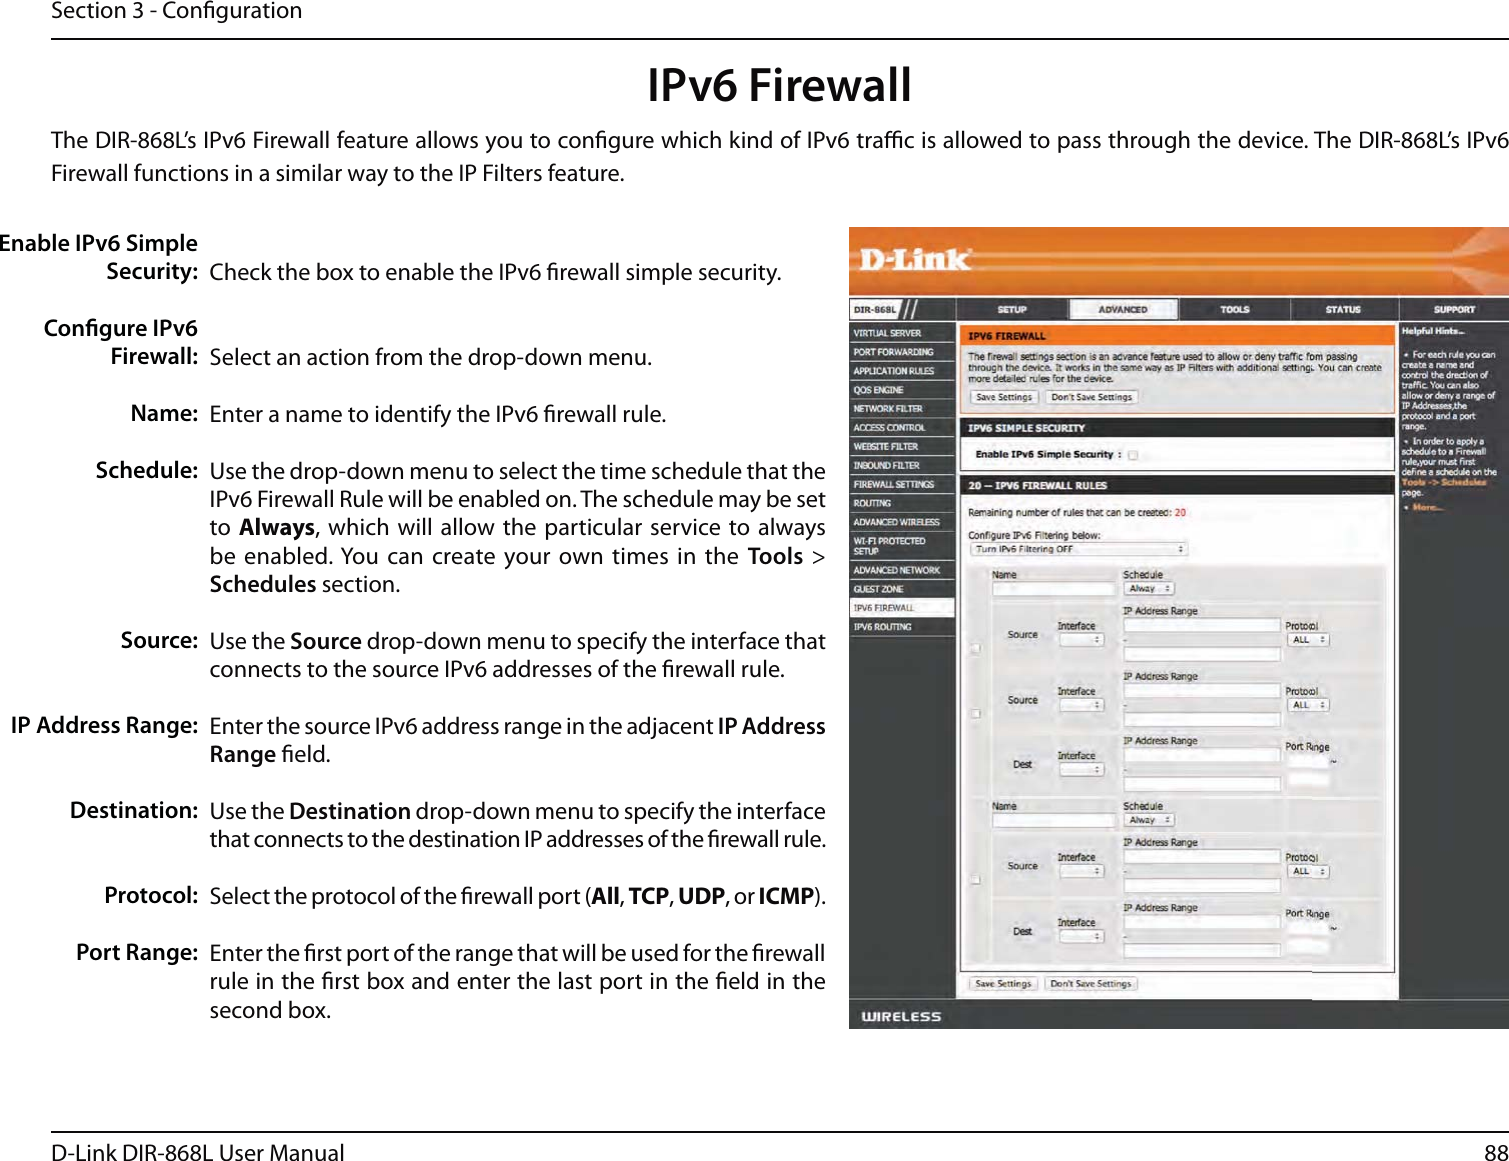 88D-Link DIR-868L User ManualSection 3 - CongurationIPv6 FirewallThe DIR-868L’s IPv6 Firewall feature allows you to congure which kind of IPv6 trac is allowed to pass through the device. The DIR-868L’s IPv6 Firewall functions in a similar way to the IP Filters feature.Check the box to enable the IPv6 rewall simple security.Select an action from the drop-down menu.Enter a name to identify the IPv6 rewall rule.Use the drop-down menu to select the time schedule that the IPv6 Firewall Rule will be enabled on. The schedule may be set to  Always, which will allow the particular service to always be enabled. You can create your own times in the Tools &gt; Schedules section. Use the Source drop-down menu to specify the interface that connects to the source IPv6 addresses of the rewall rule. Enter the source IPv6 address range in the adjacent IP Address Range eld.Use the Destination drop-down menu to specify the interface that connects to the destination IP addresses of the rewall rule. Select the protocol of the rewall port (All, TCP, UDP, or ICMP).Enter the rst port of the range that will be used for the rewall rule in the rst box and enter the last port in the eld in the second box.Enable IPv6 Simple  Security:Congure IPv6 Firewall:Name:Schedule:Source:IP Address Range:Destination:Protocol:Port Range: